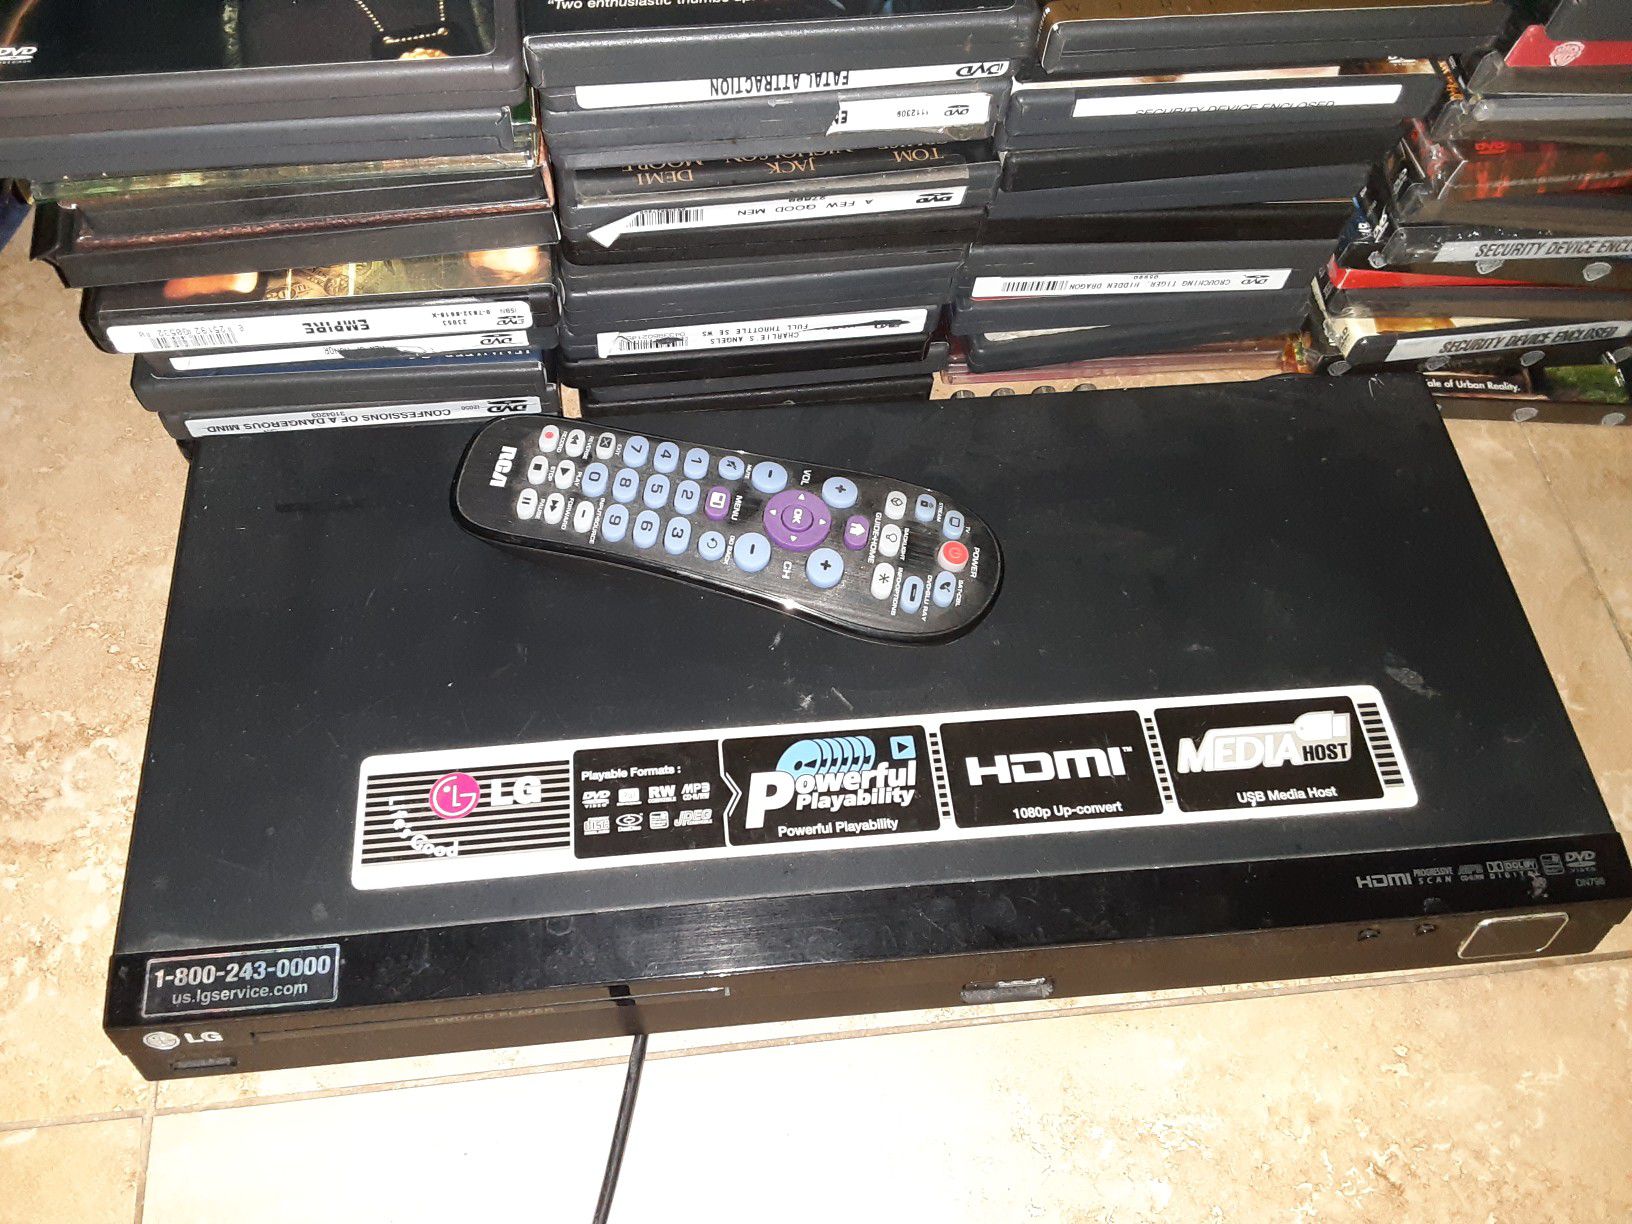 LG DVD player with 50 DVD MOVIES